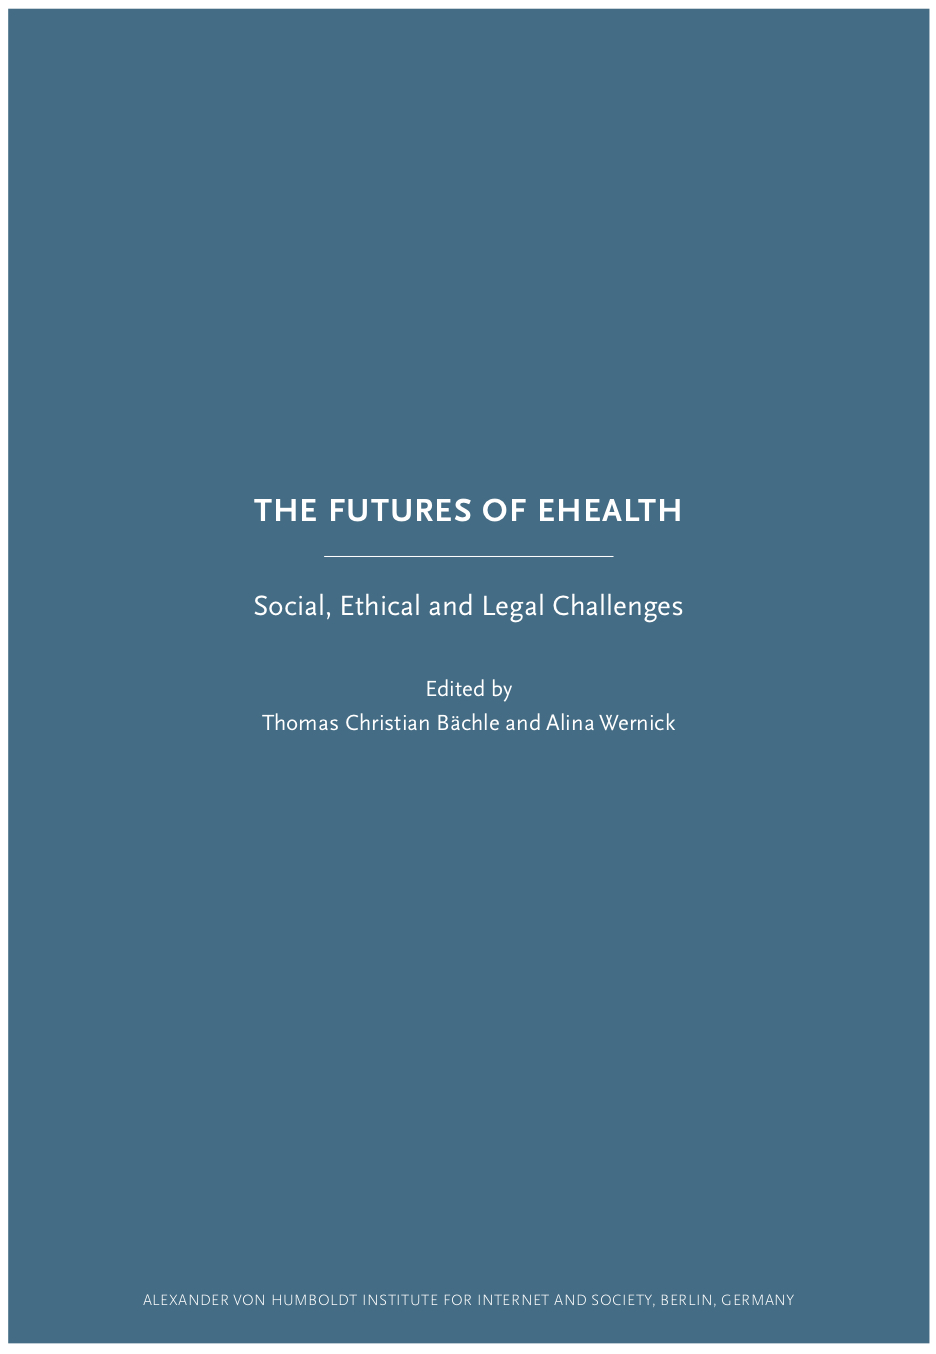 The futures of eHealth. Social, ethical and legal challenges